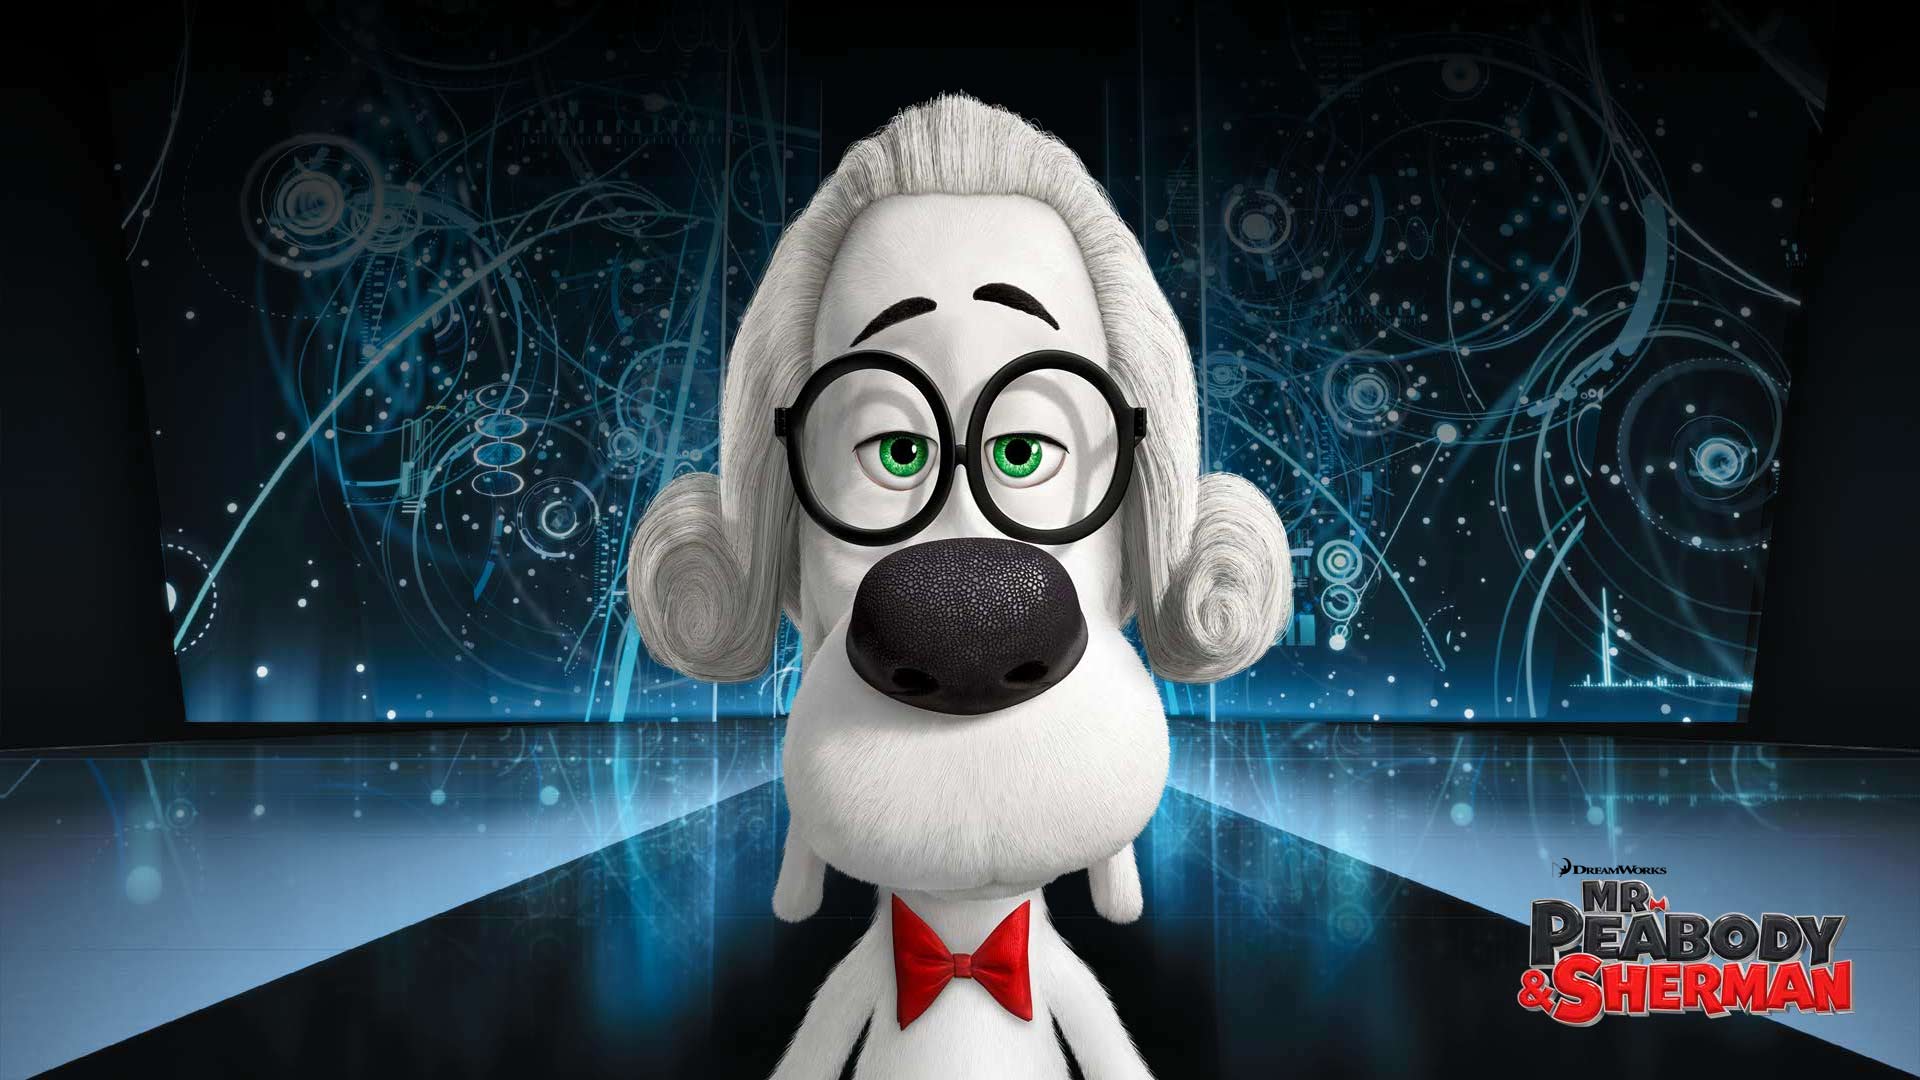 Mr. Peabody and Sherman from the DreamWorks CG animated movie. 